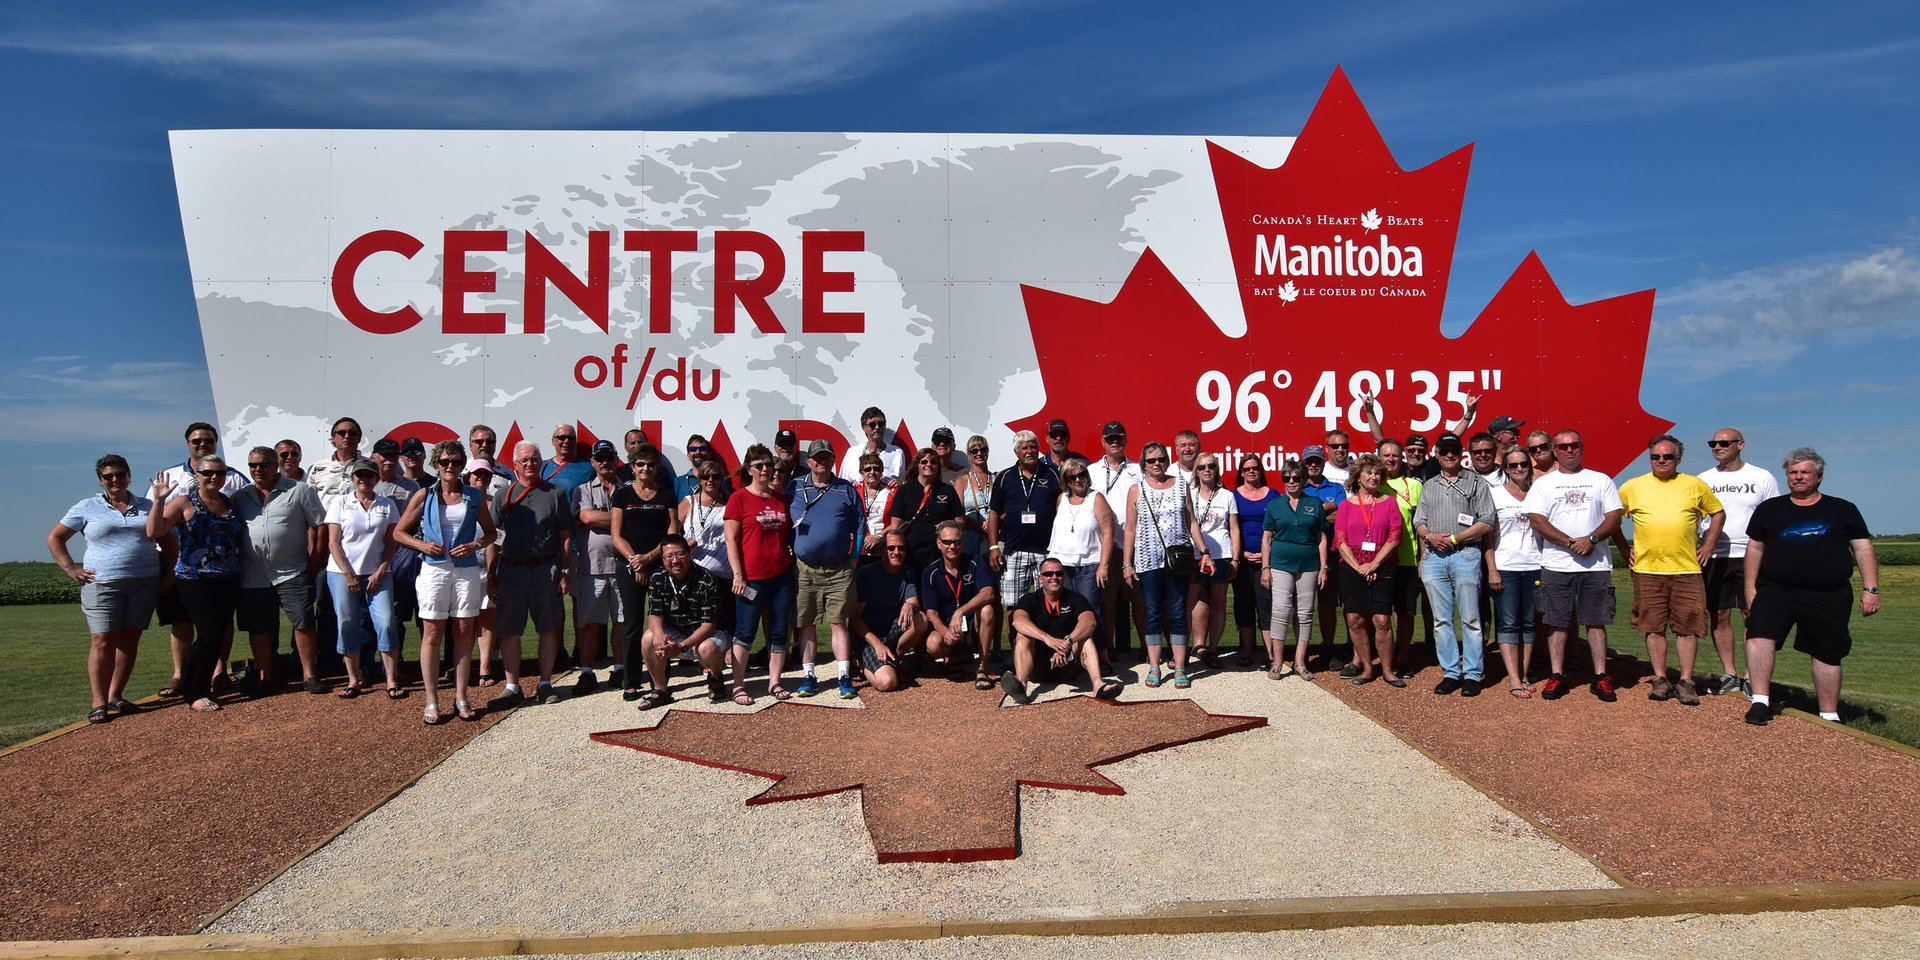 Our Meet in the Middle Gang - the Center of Canada - July 14th 2018